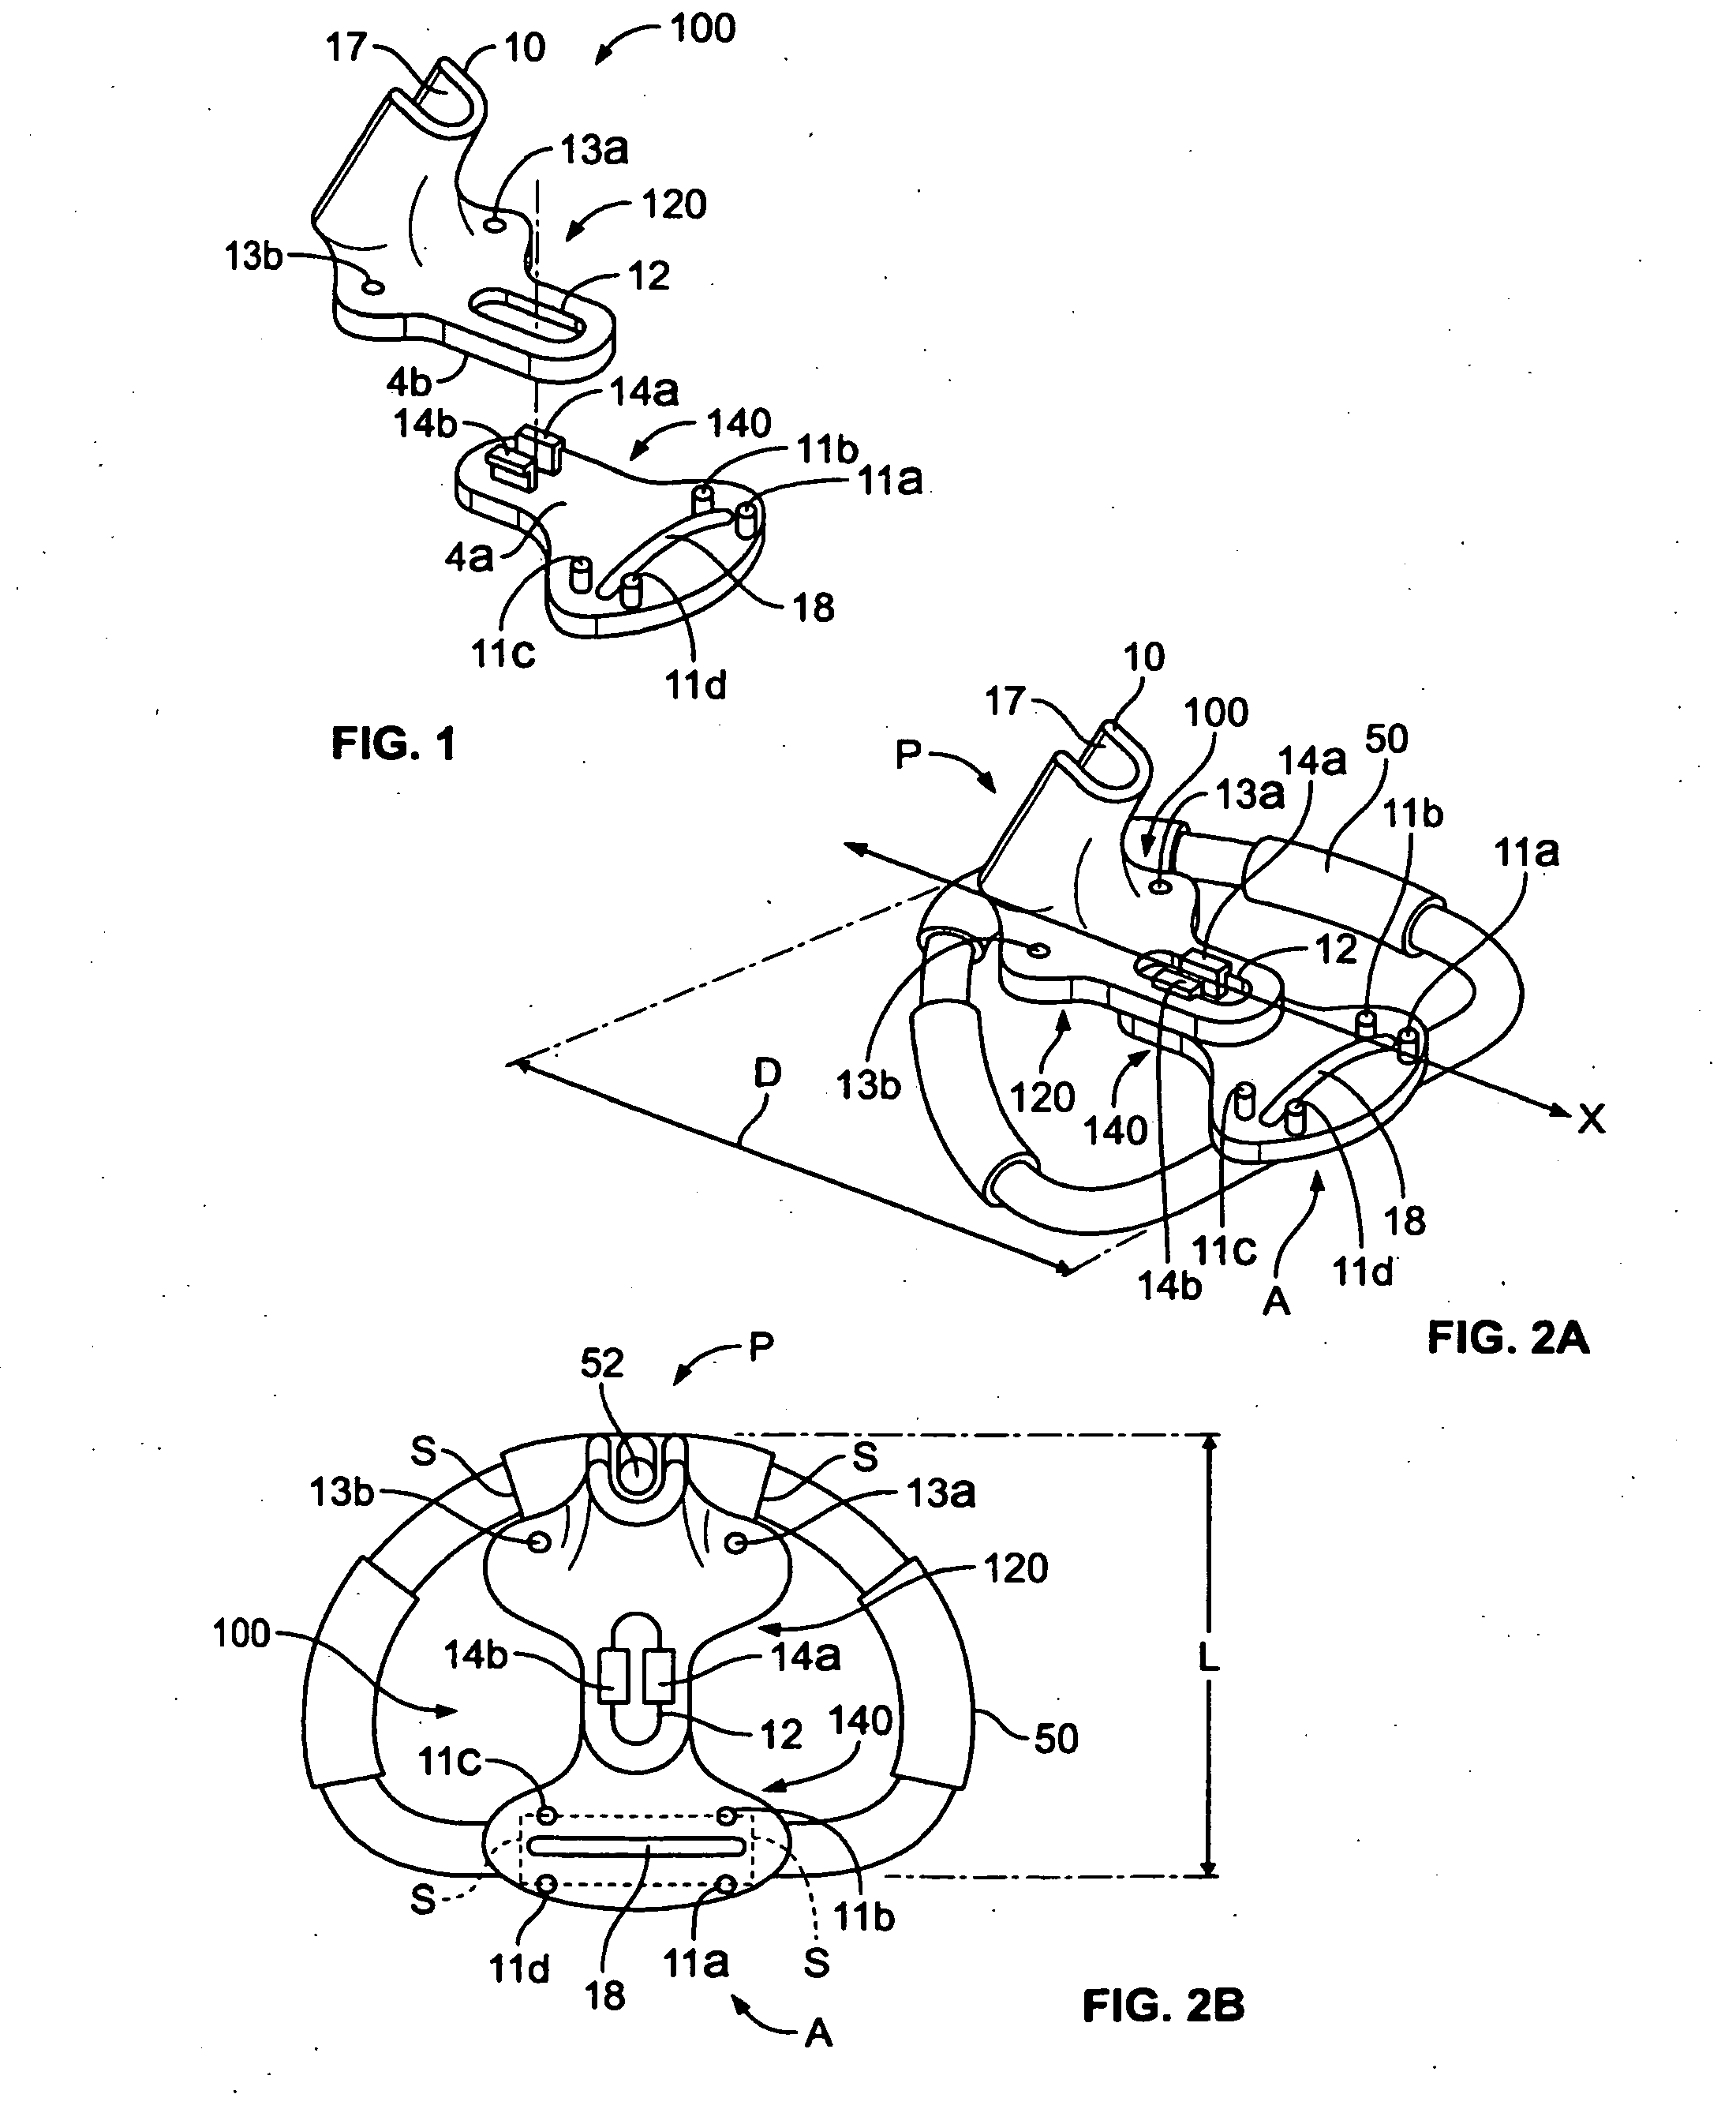 Adjustable prosthetic anatomical device holder and handle for the implantation of an annuloplasty ring